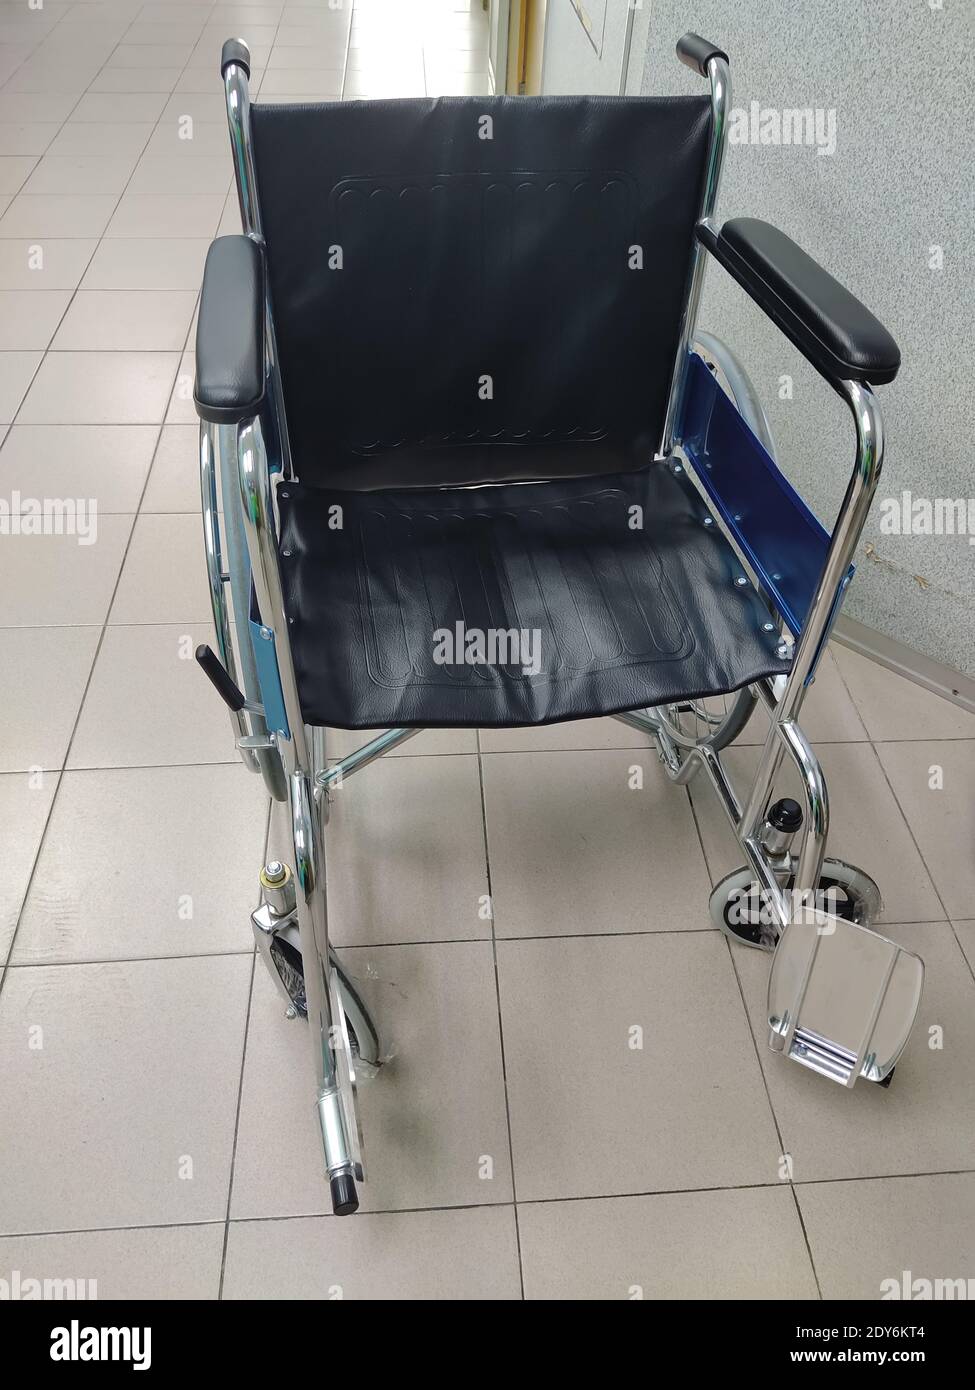 High Angle View Of Empty Wheelchair On Tiled Floor Stock Photo